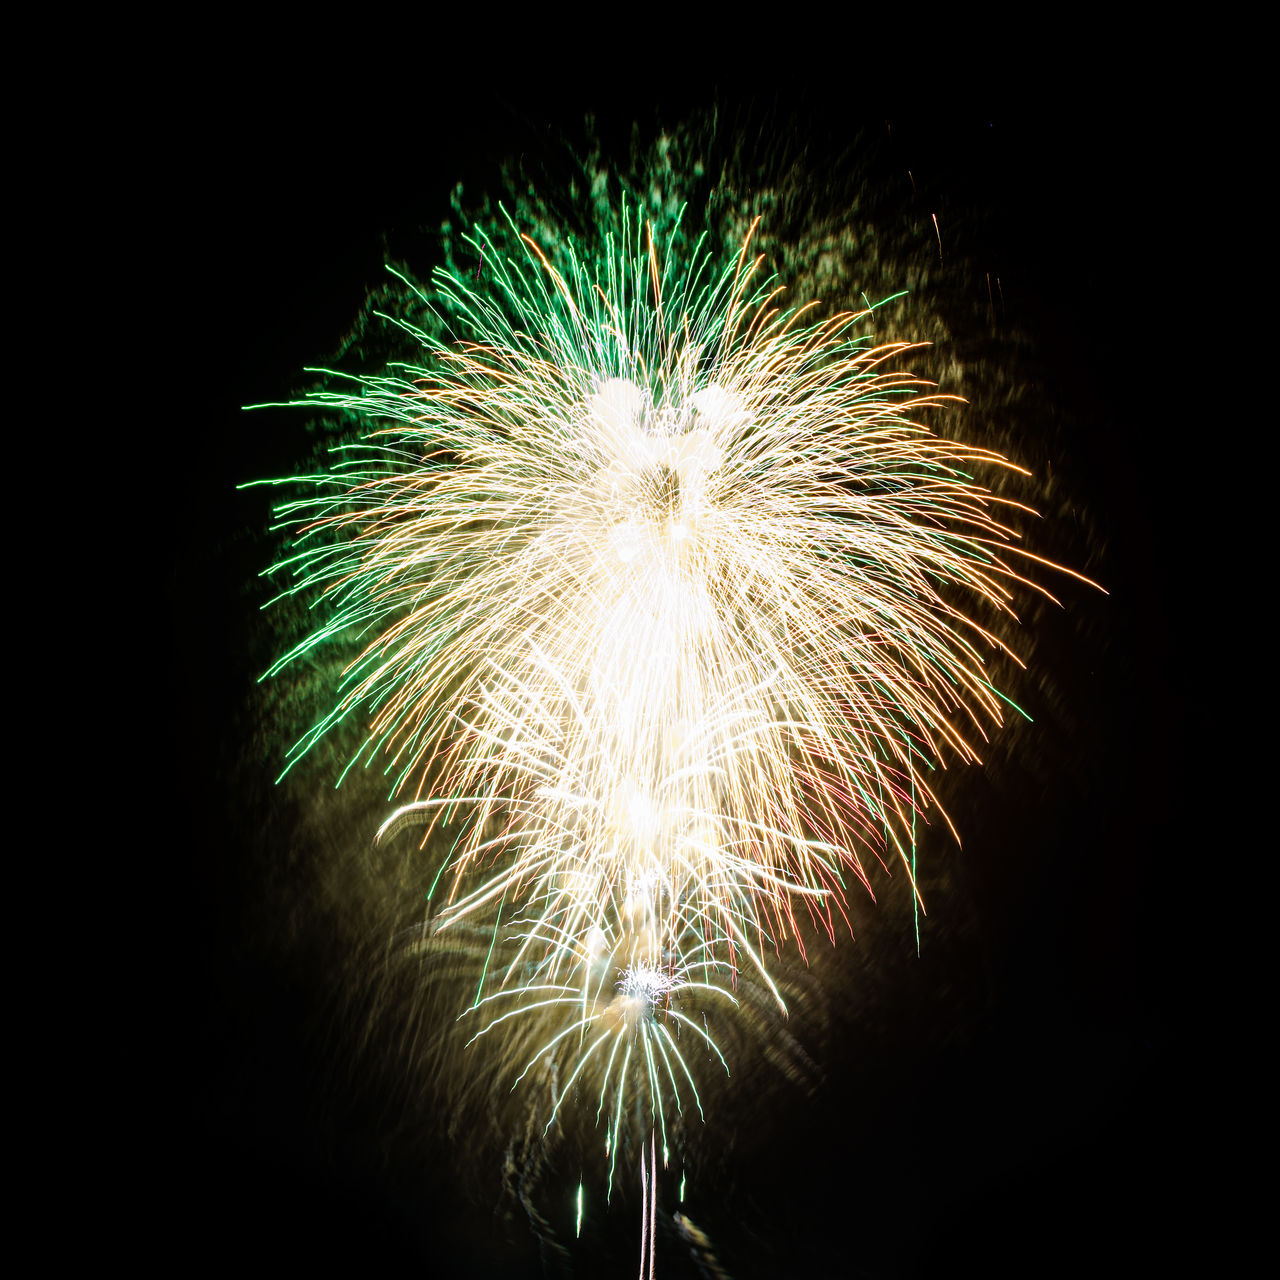 celebration, fireworks, motion, event, illuminated, night, arts culture and entertainment, firework display, exploding, glowing, no people, nature, long exposure, blurred motion, recreation, firework - man made object, multi colored, burning, sky, low angle view, outdoors, light